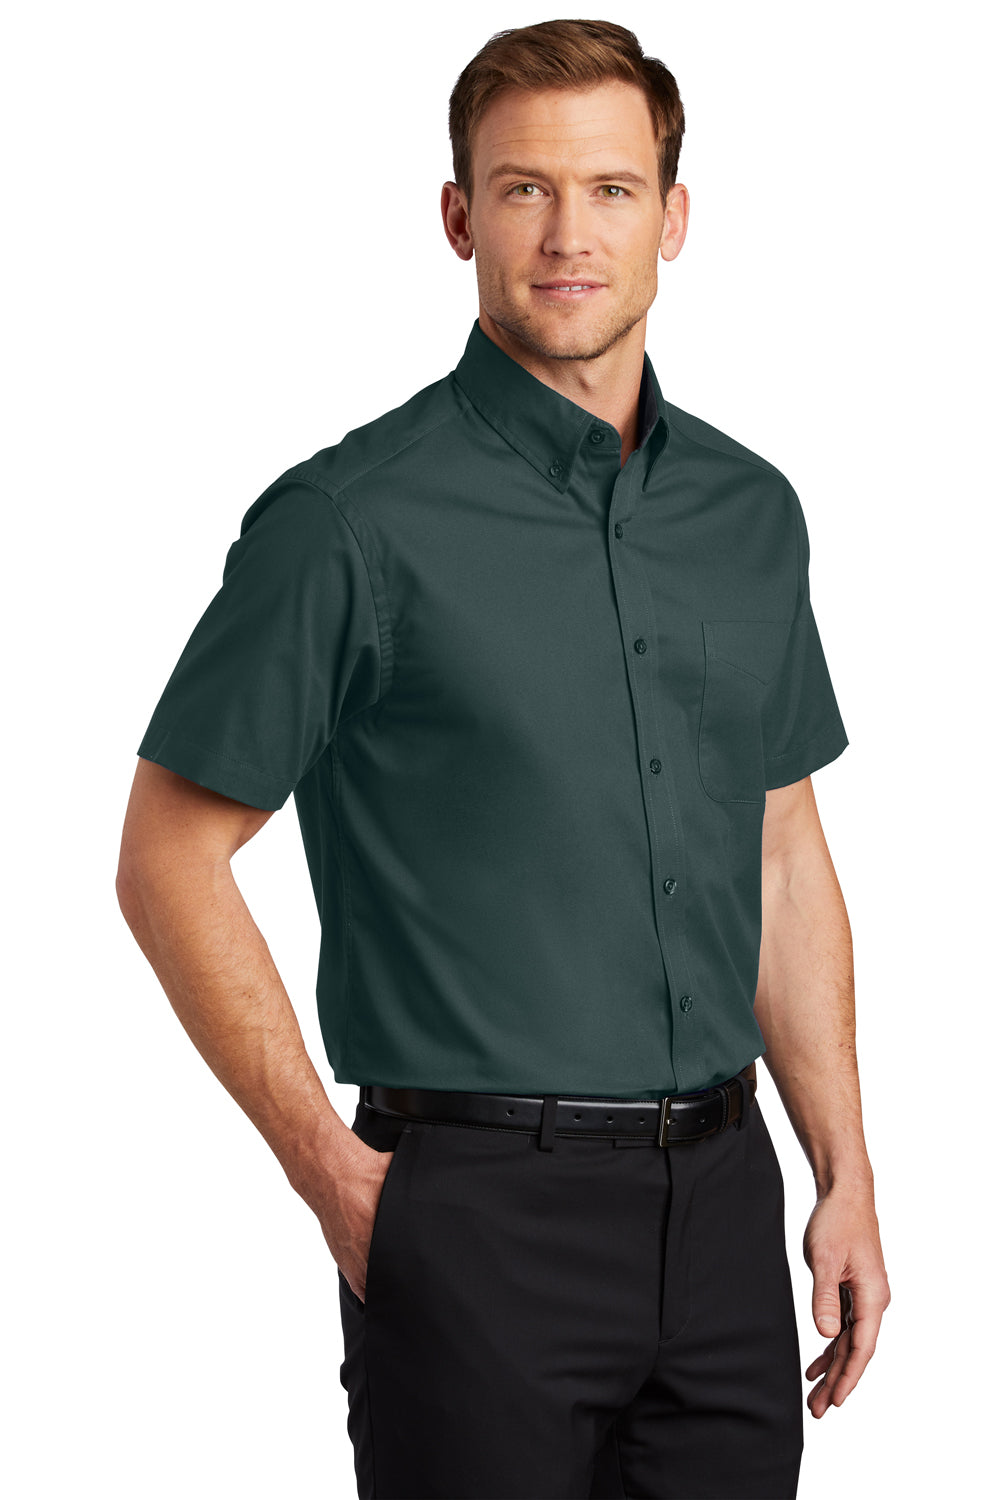 Port Authority S508/TLS508 Mens Easy Care Wrinkle Resistant Short Sleeve Button Down Shirt w/ Pocket Dark Green 3Q